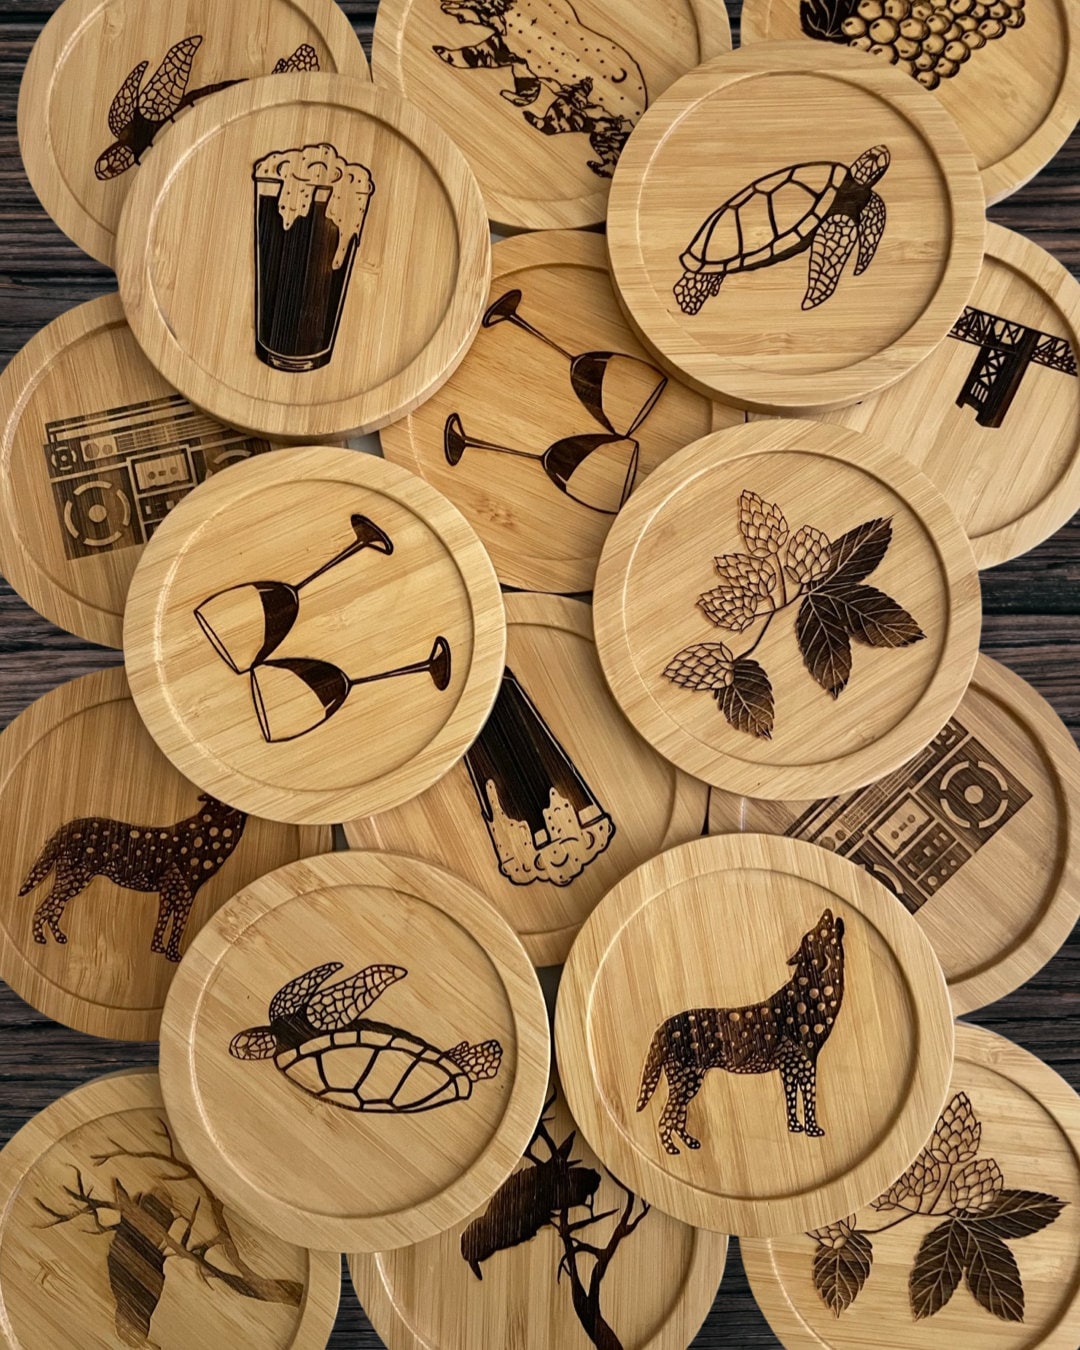 Wine Laser Etched Bamboo Coaster - Original art - made in the USA - lightweight, eco-friendly, water resistant